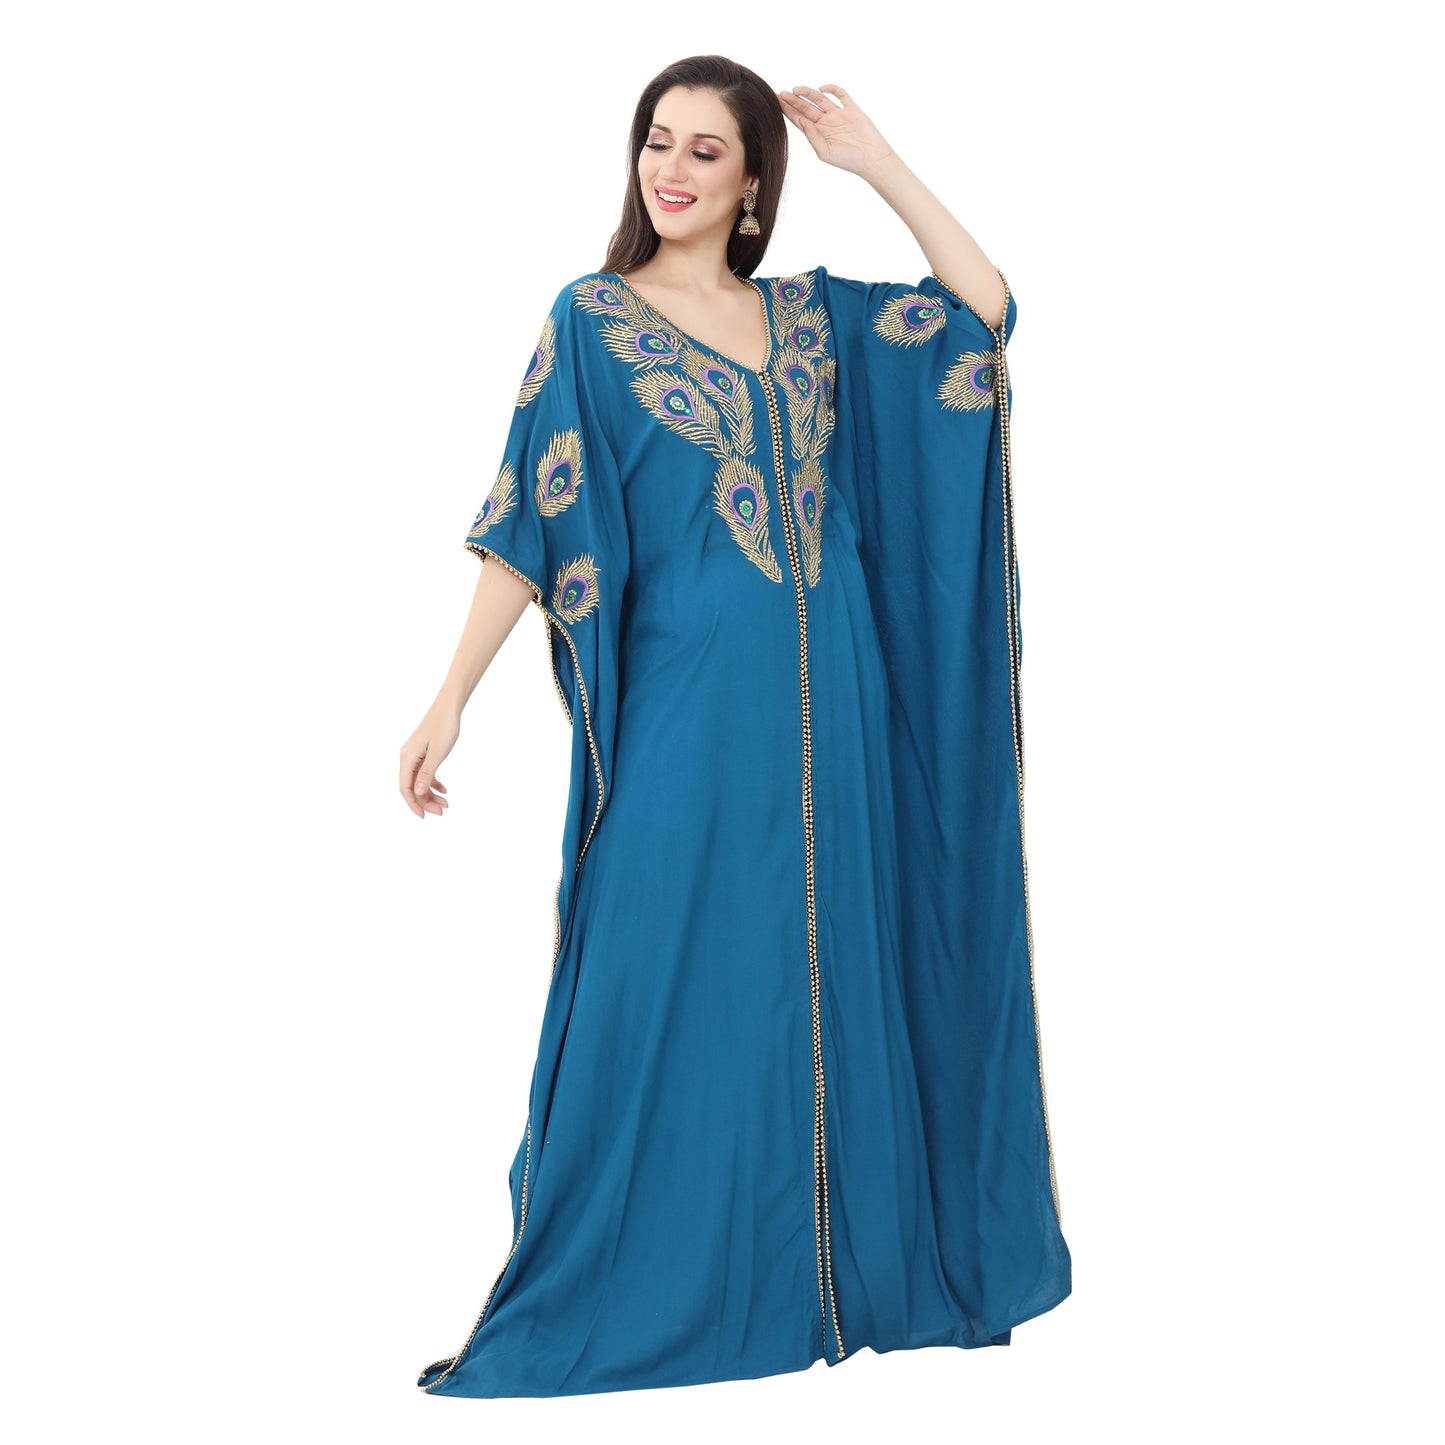 Load image into Gallery viewer, Kaftan Maxi with Colorful Peacock Embroidery - Maxim Creation
